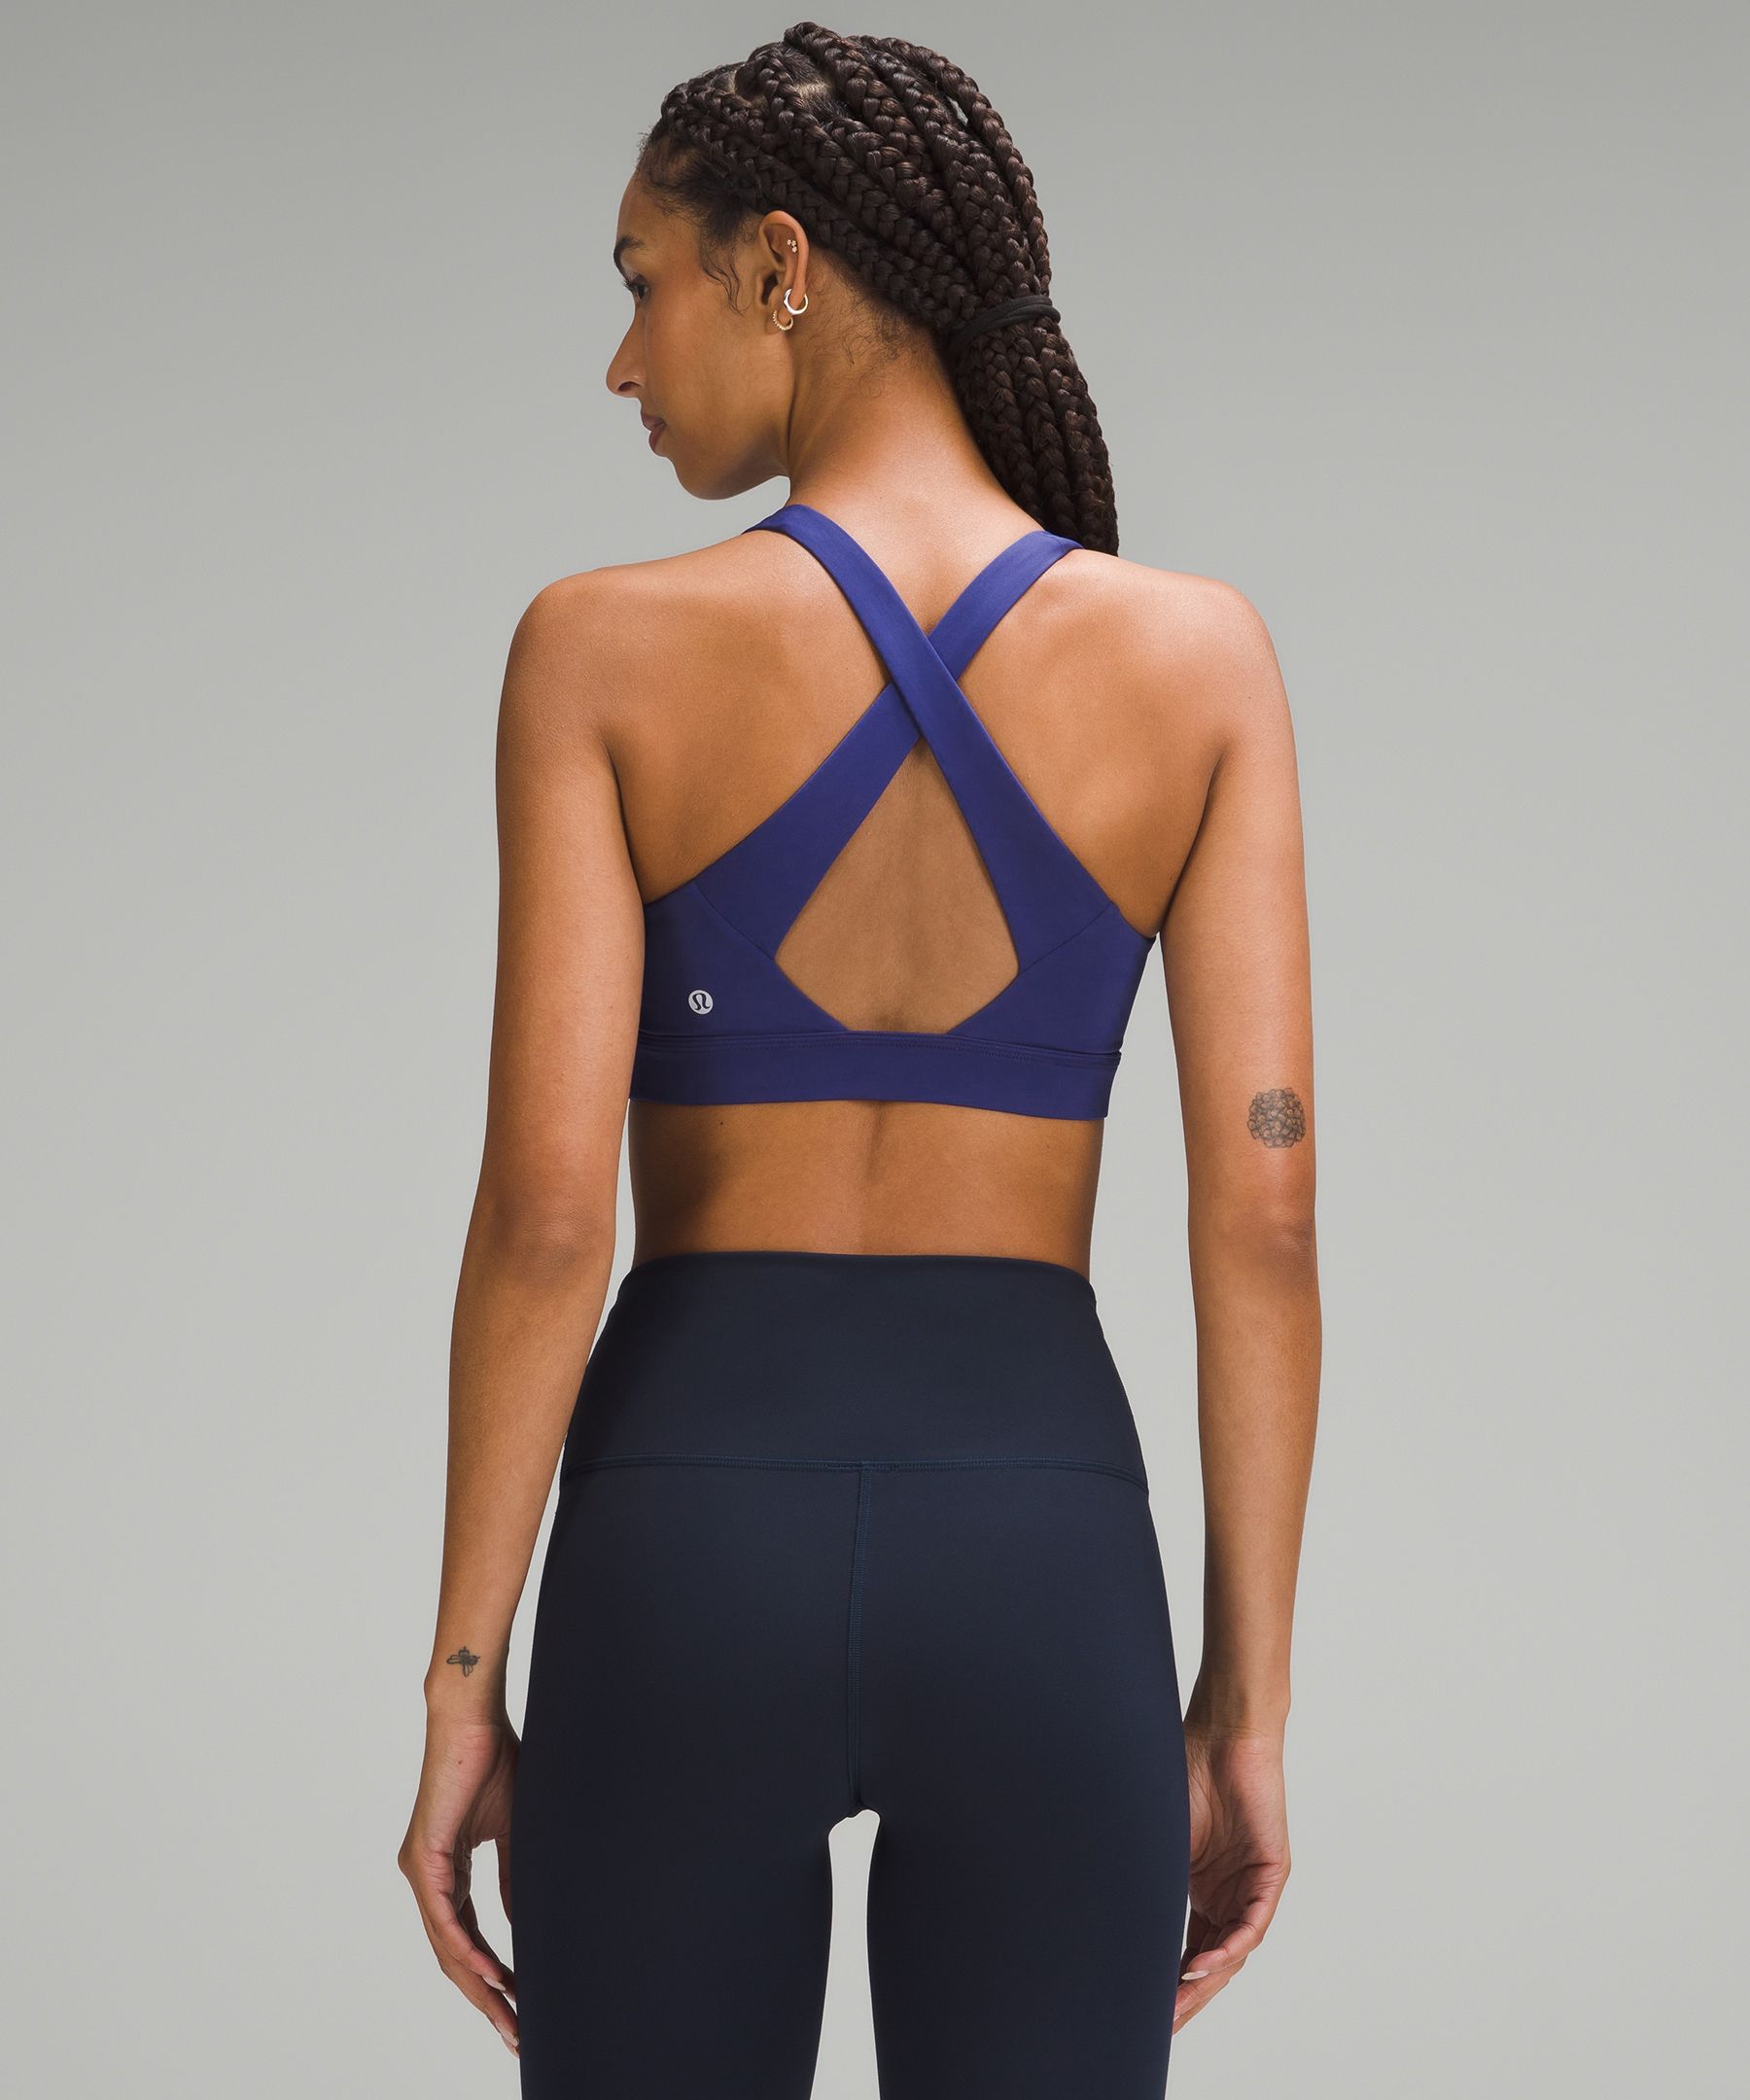 Lululemon Tank With Built-In Bra White Size 8 - $24 (58% Off Retail) - From  Julia